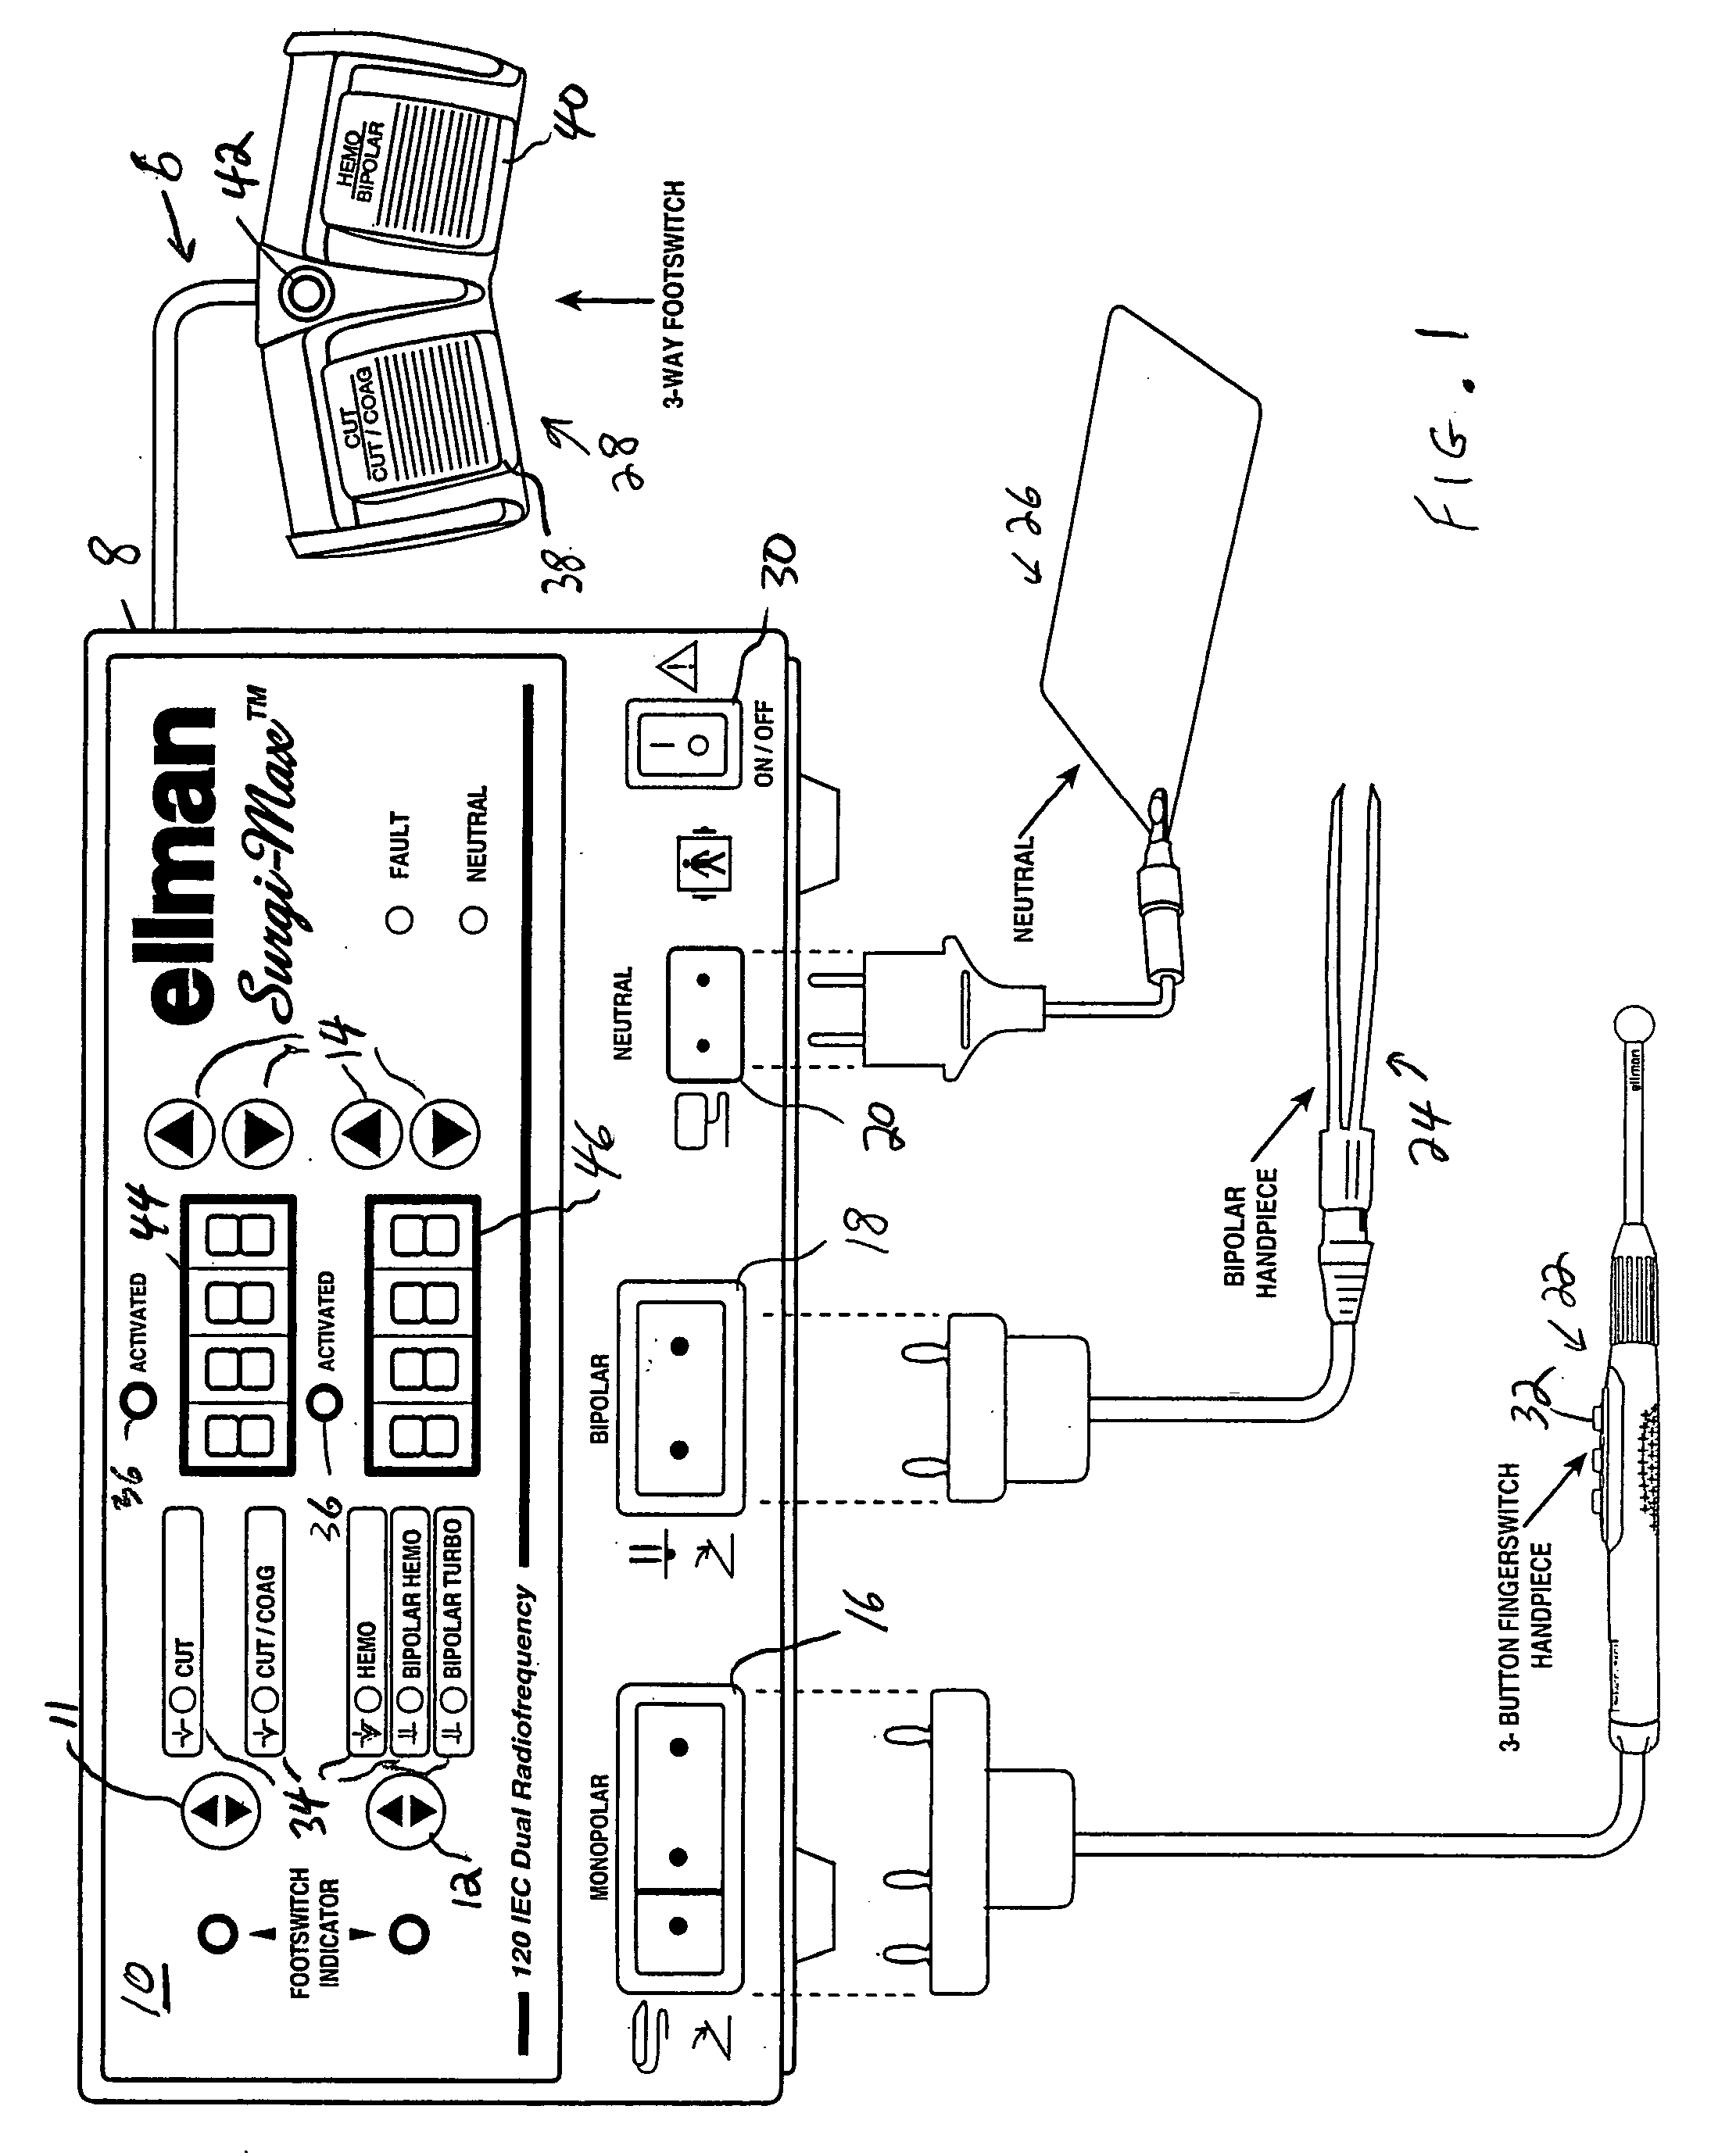 Electrosurgical instrument with enhanced capability